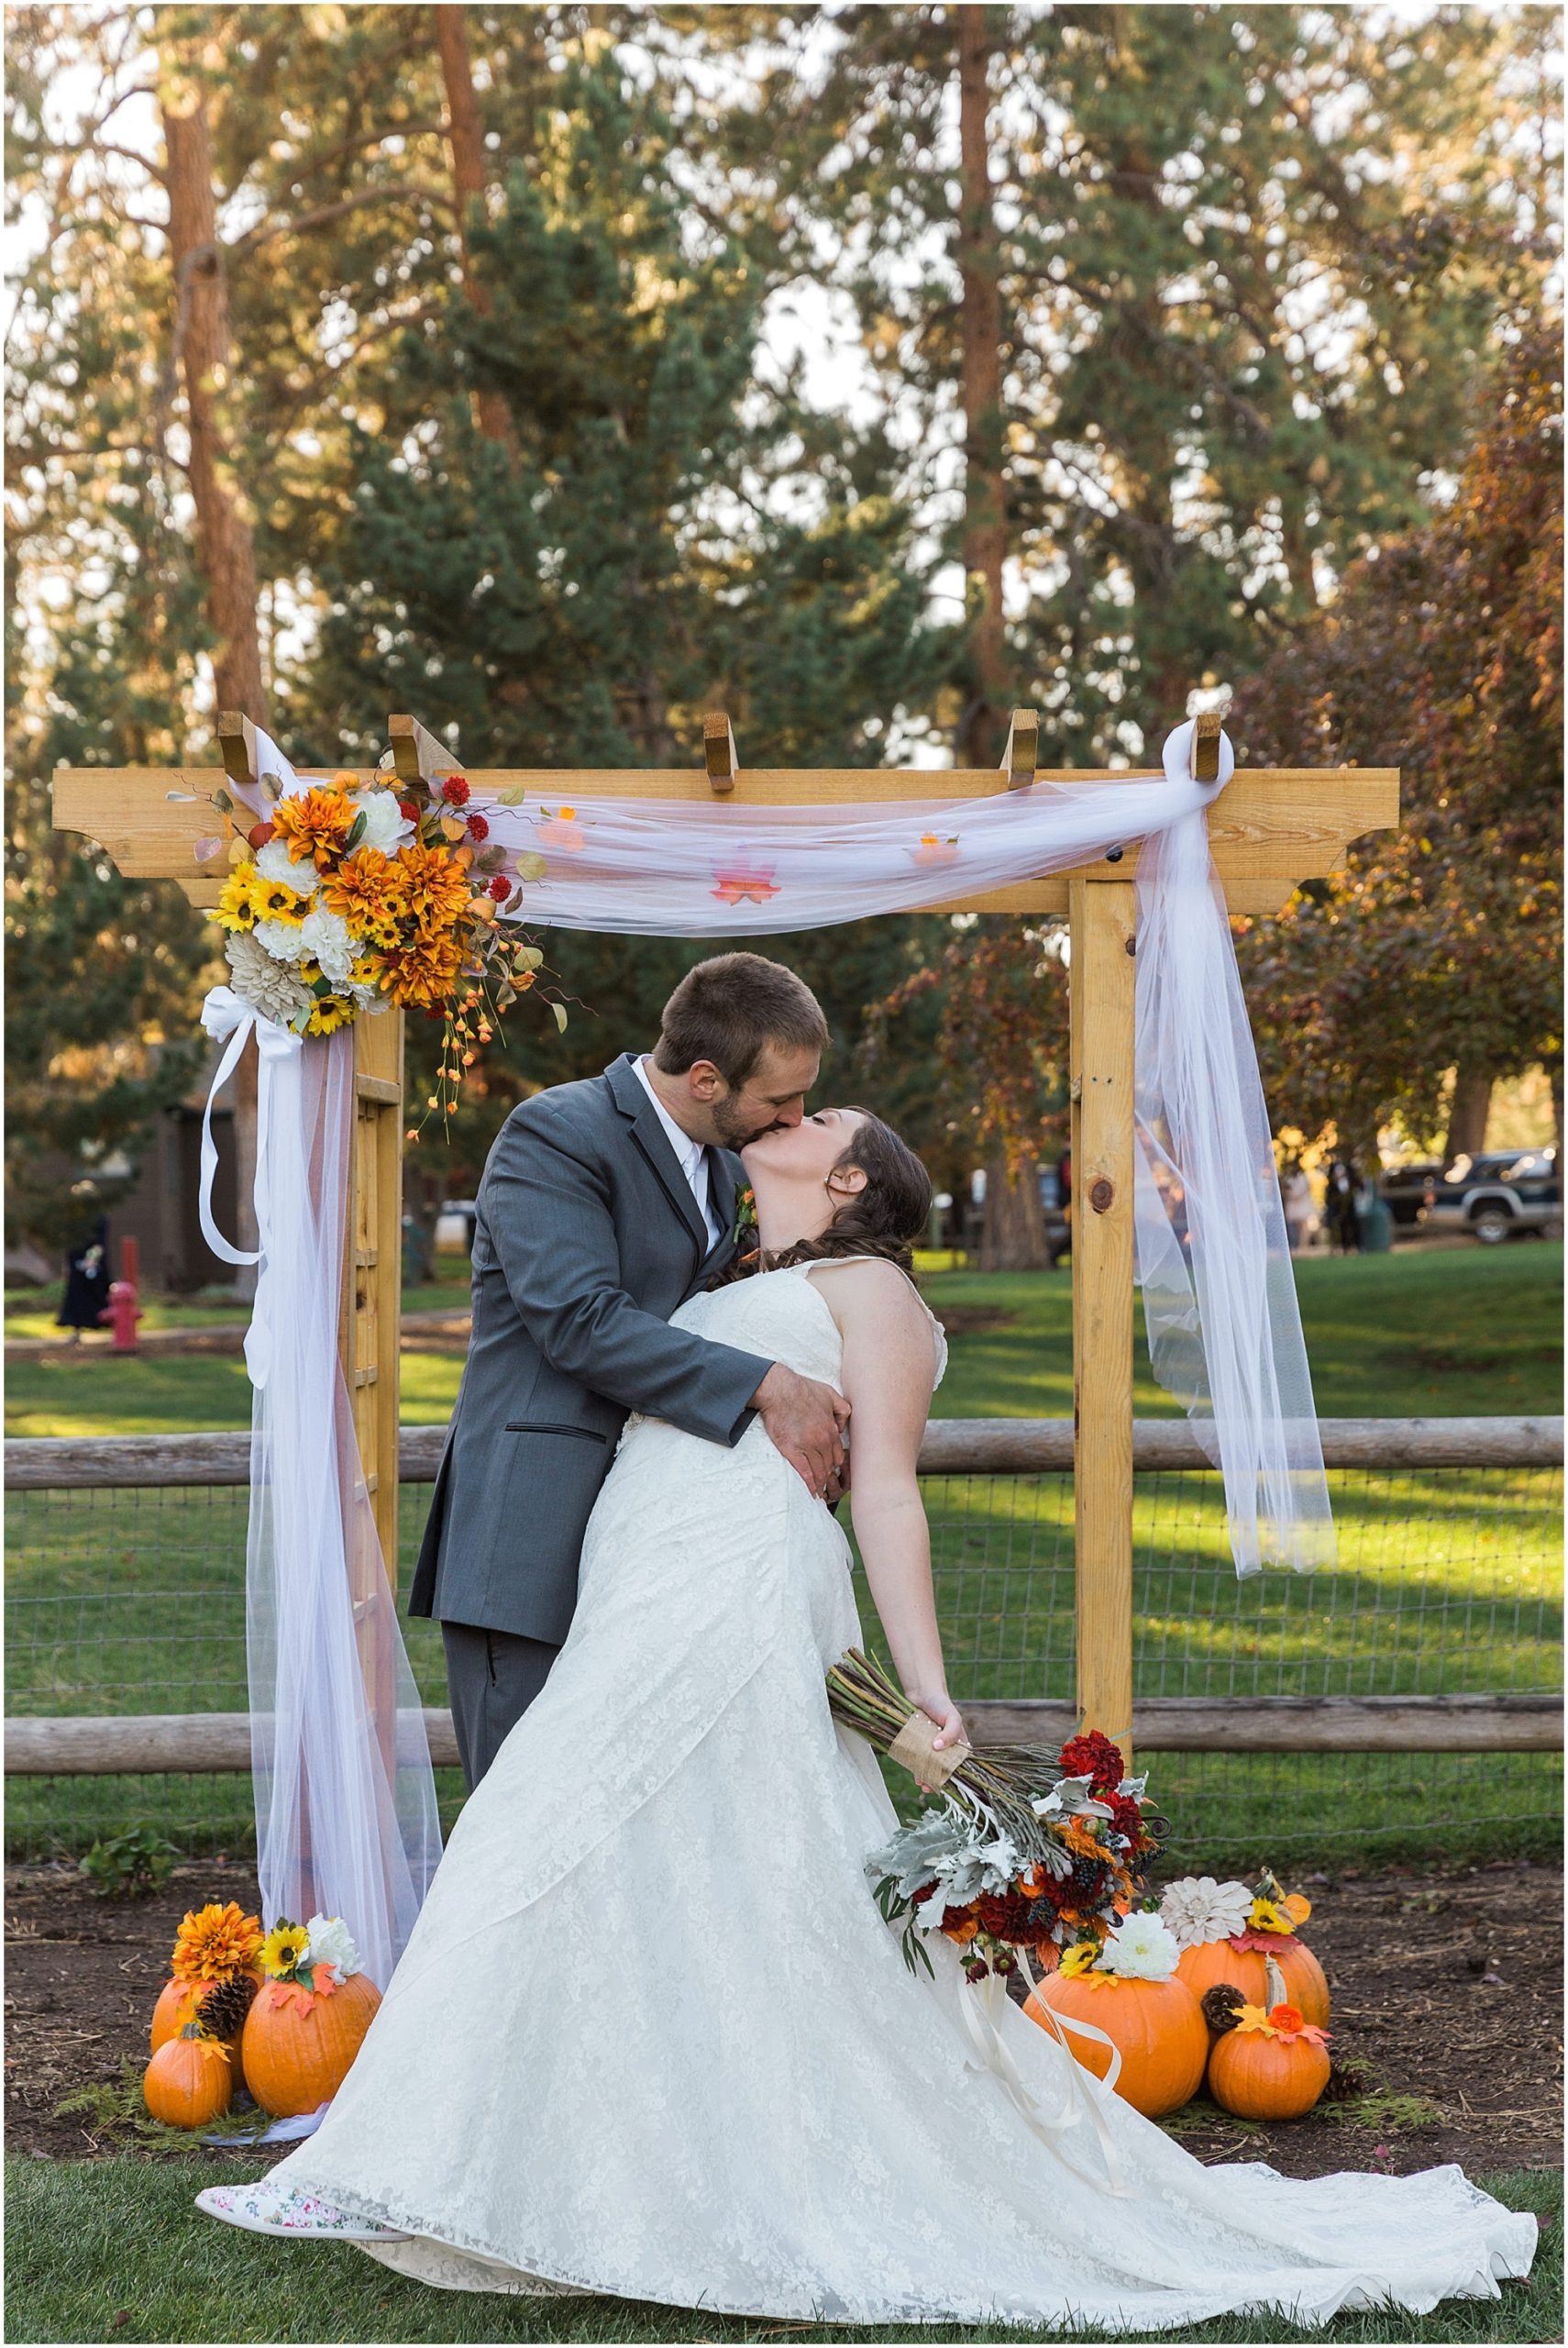 The groom dips his bride for a kiss at their Hollinshead Barn fall wedding in Bend, OR. | Erica Swantek Photography